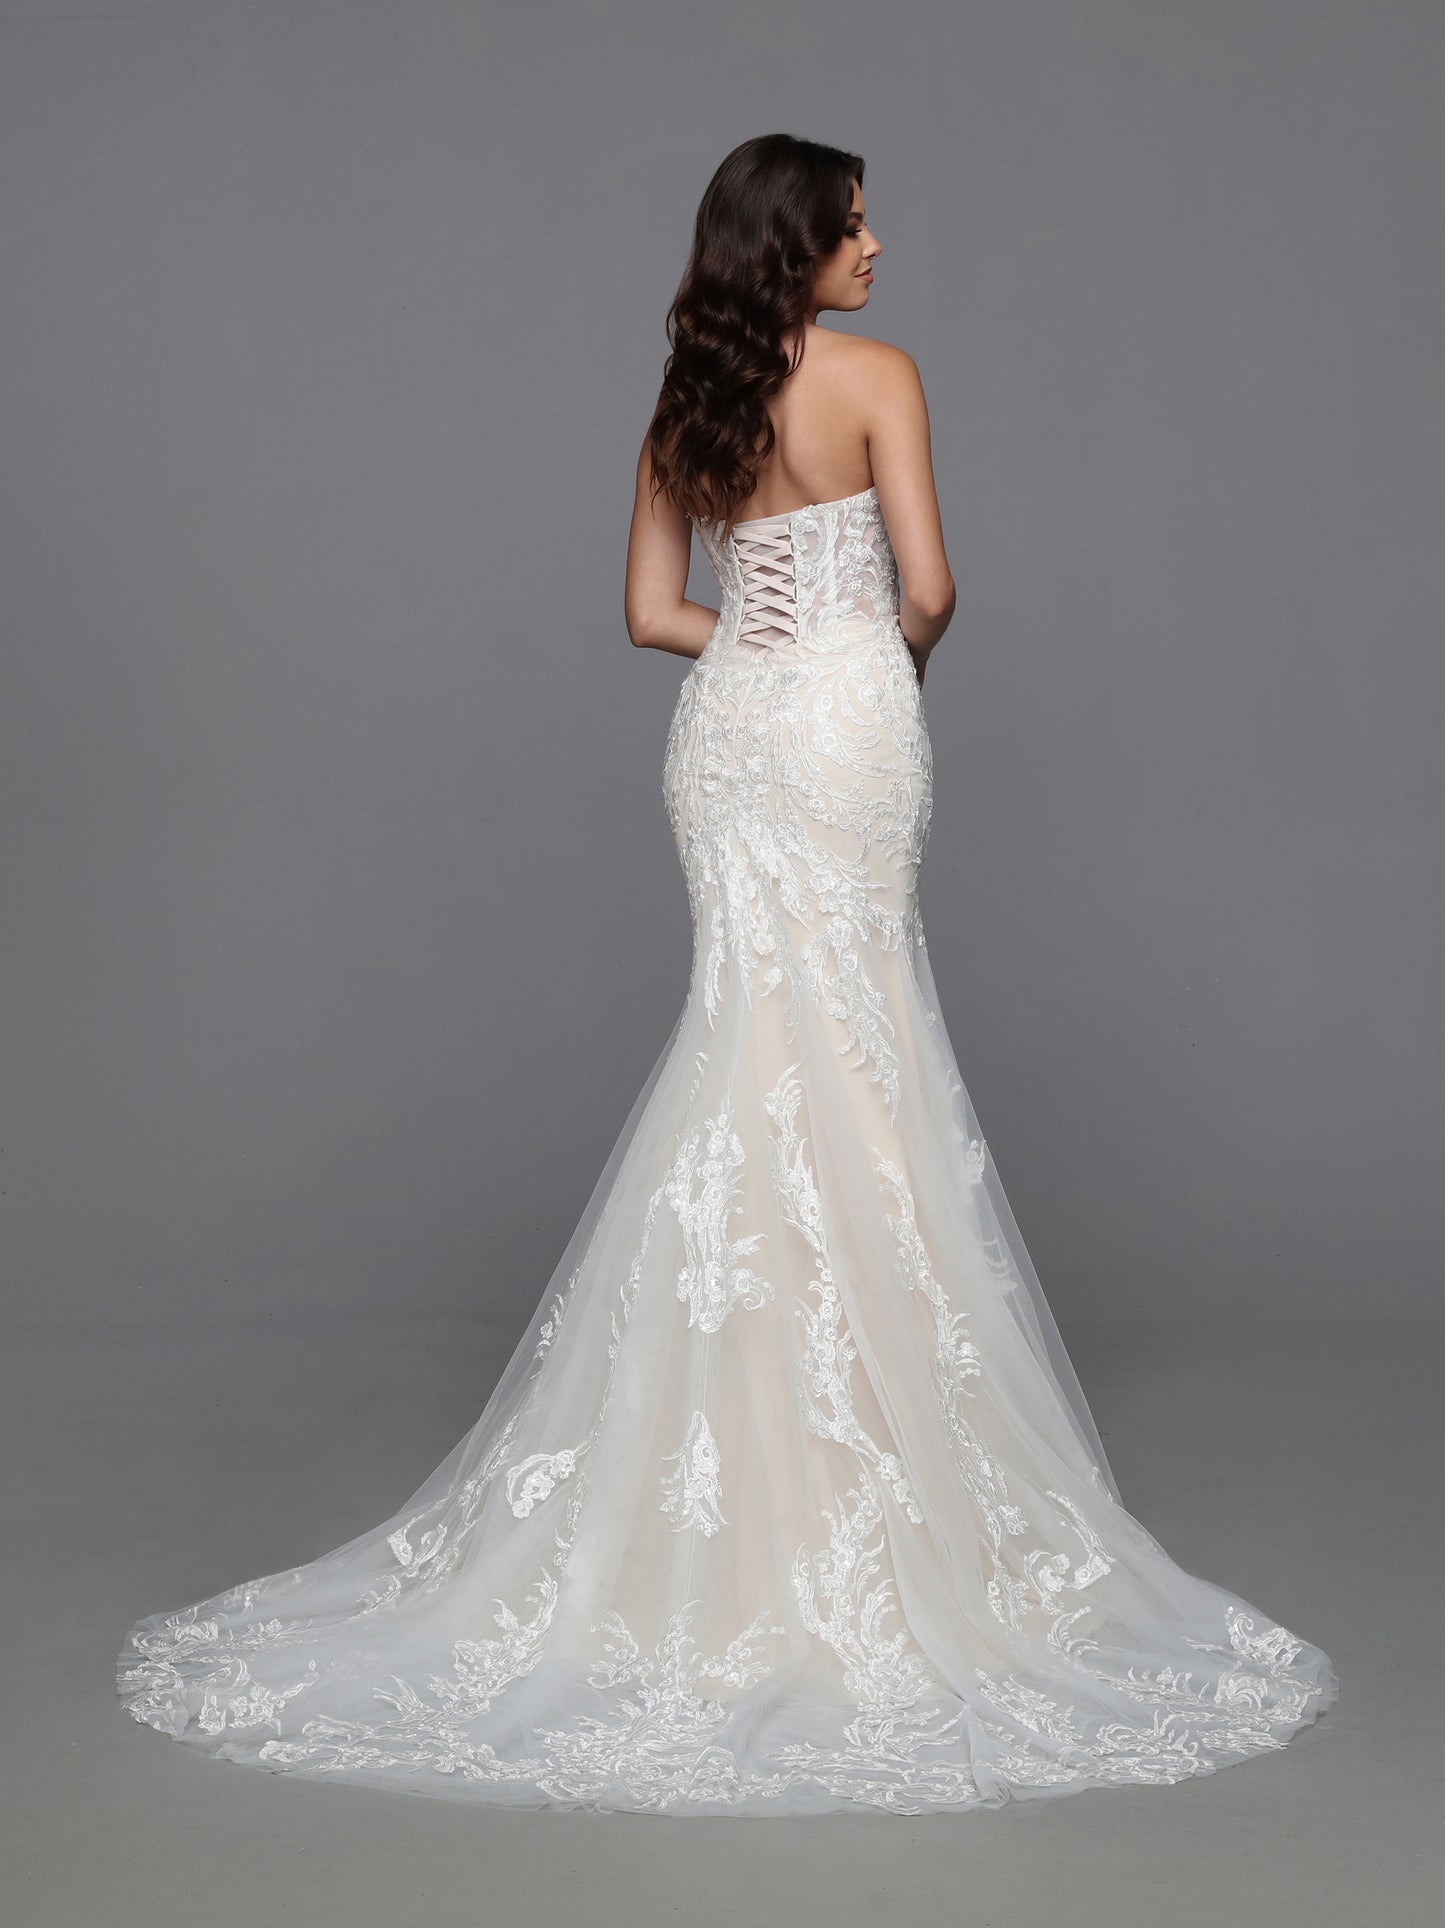 Davinci Bridal 50774 Long Sleeve Sheer Corset Lace Mermaid Wedding Dress Bridal Gown Remove the full-length sheer lace sleeves of this lovely fit and flare gown to reveal a tempting strapless sweetheart bodice with a corset back and a sweeping mermaid-style skirt.